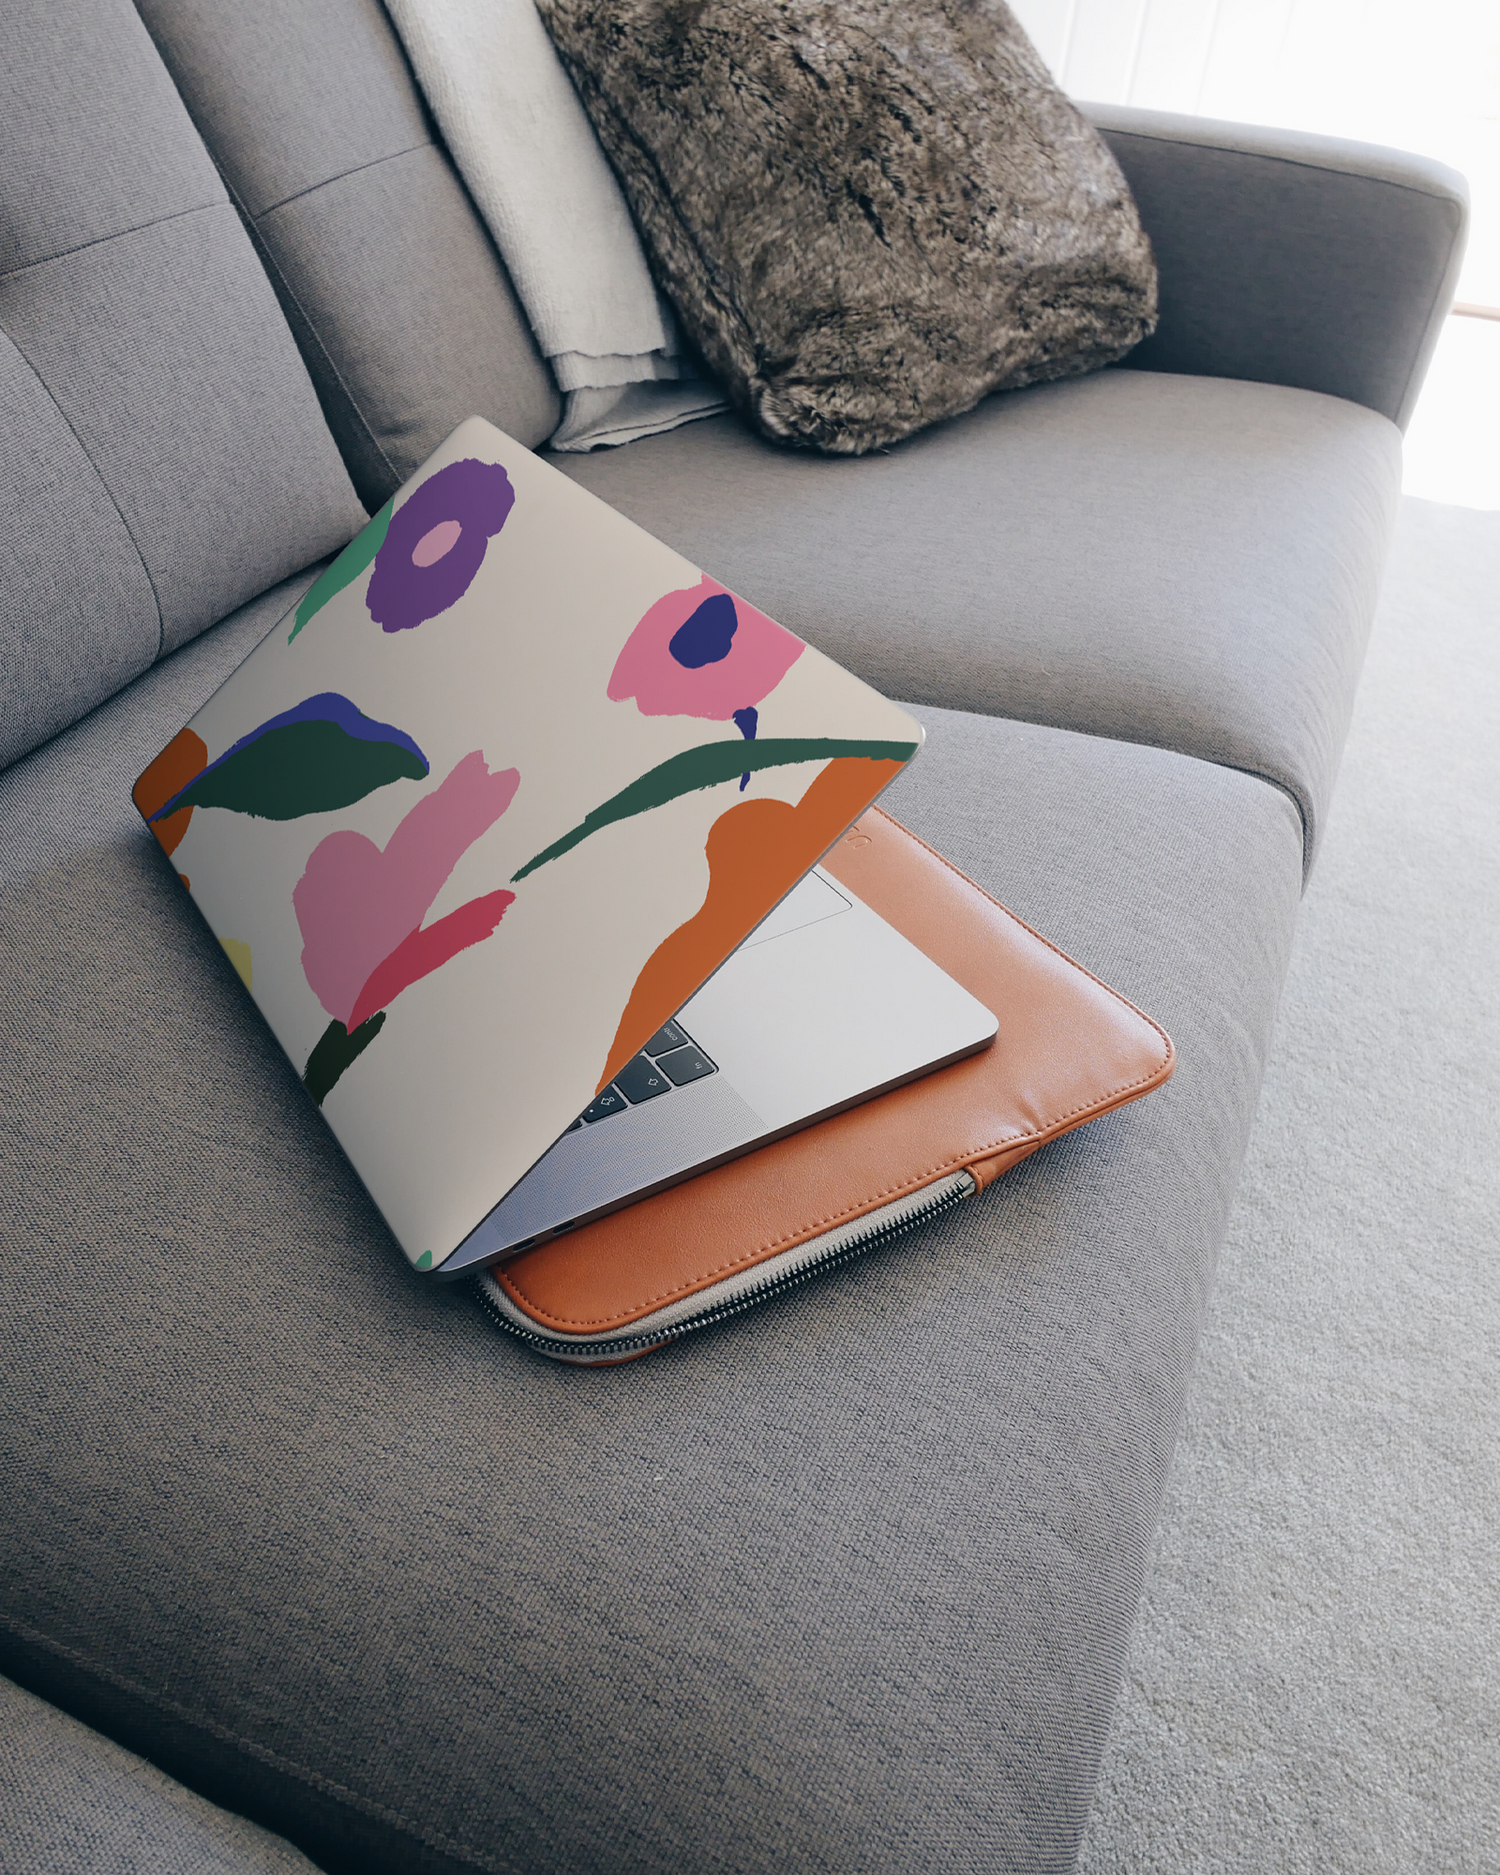 Handpainted Blooms Laptop Skin for 15 inch Apple MacBooks on a couch